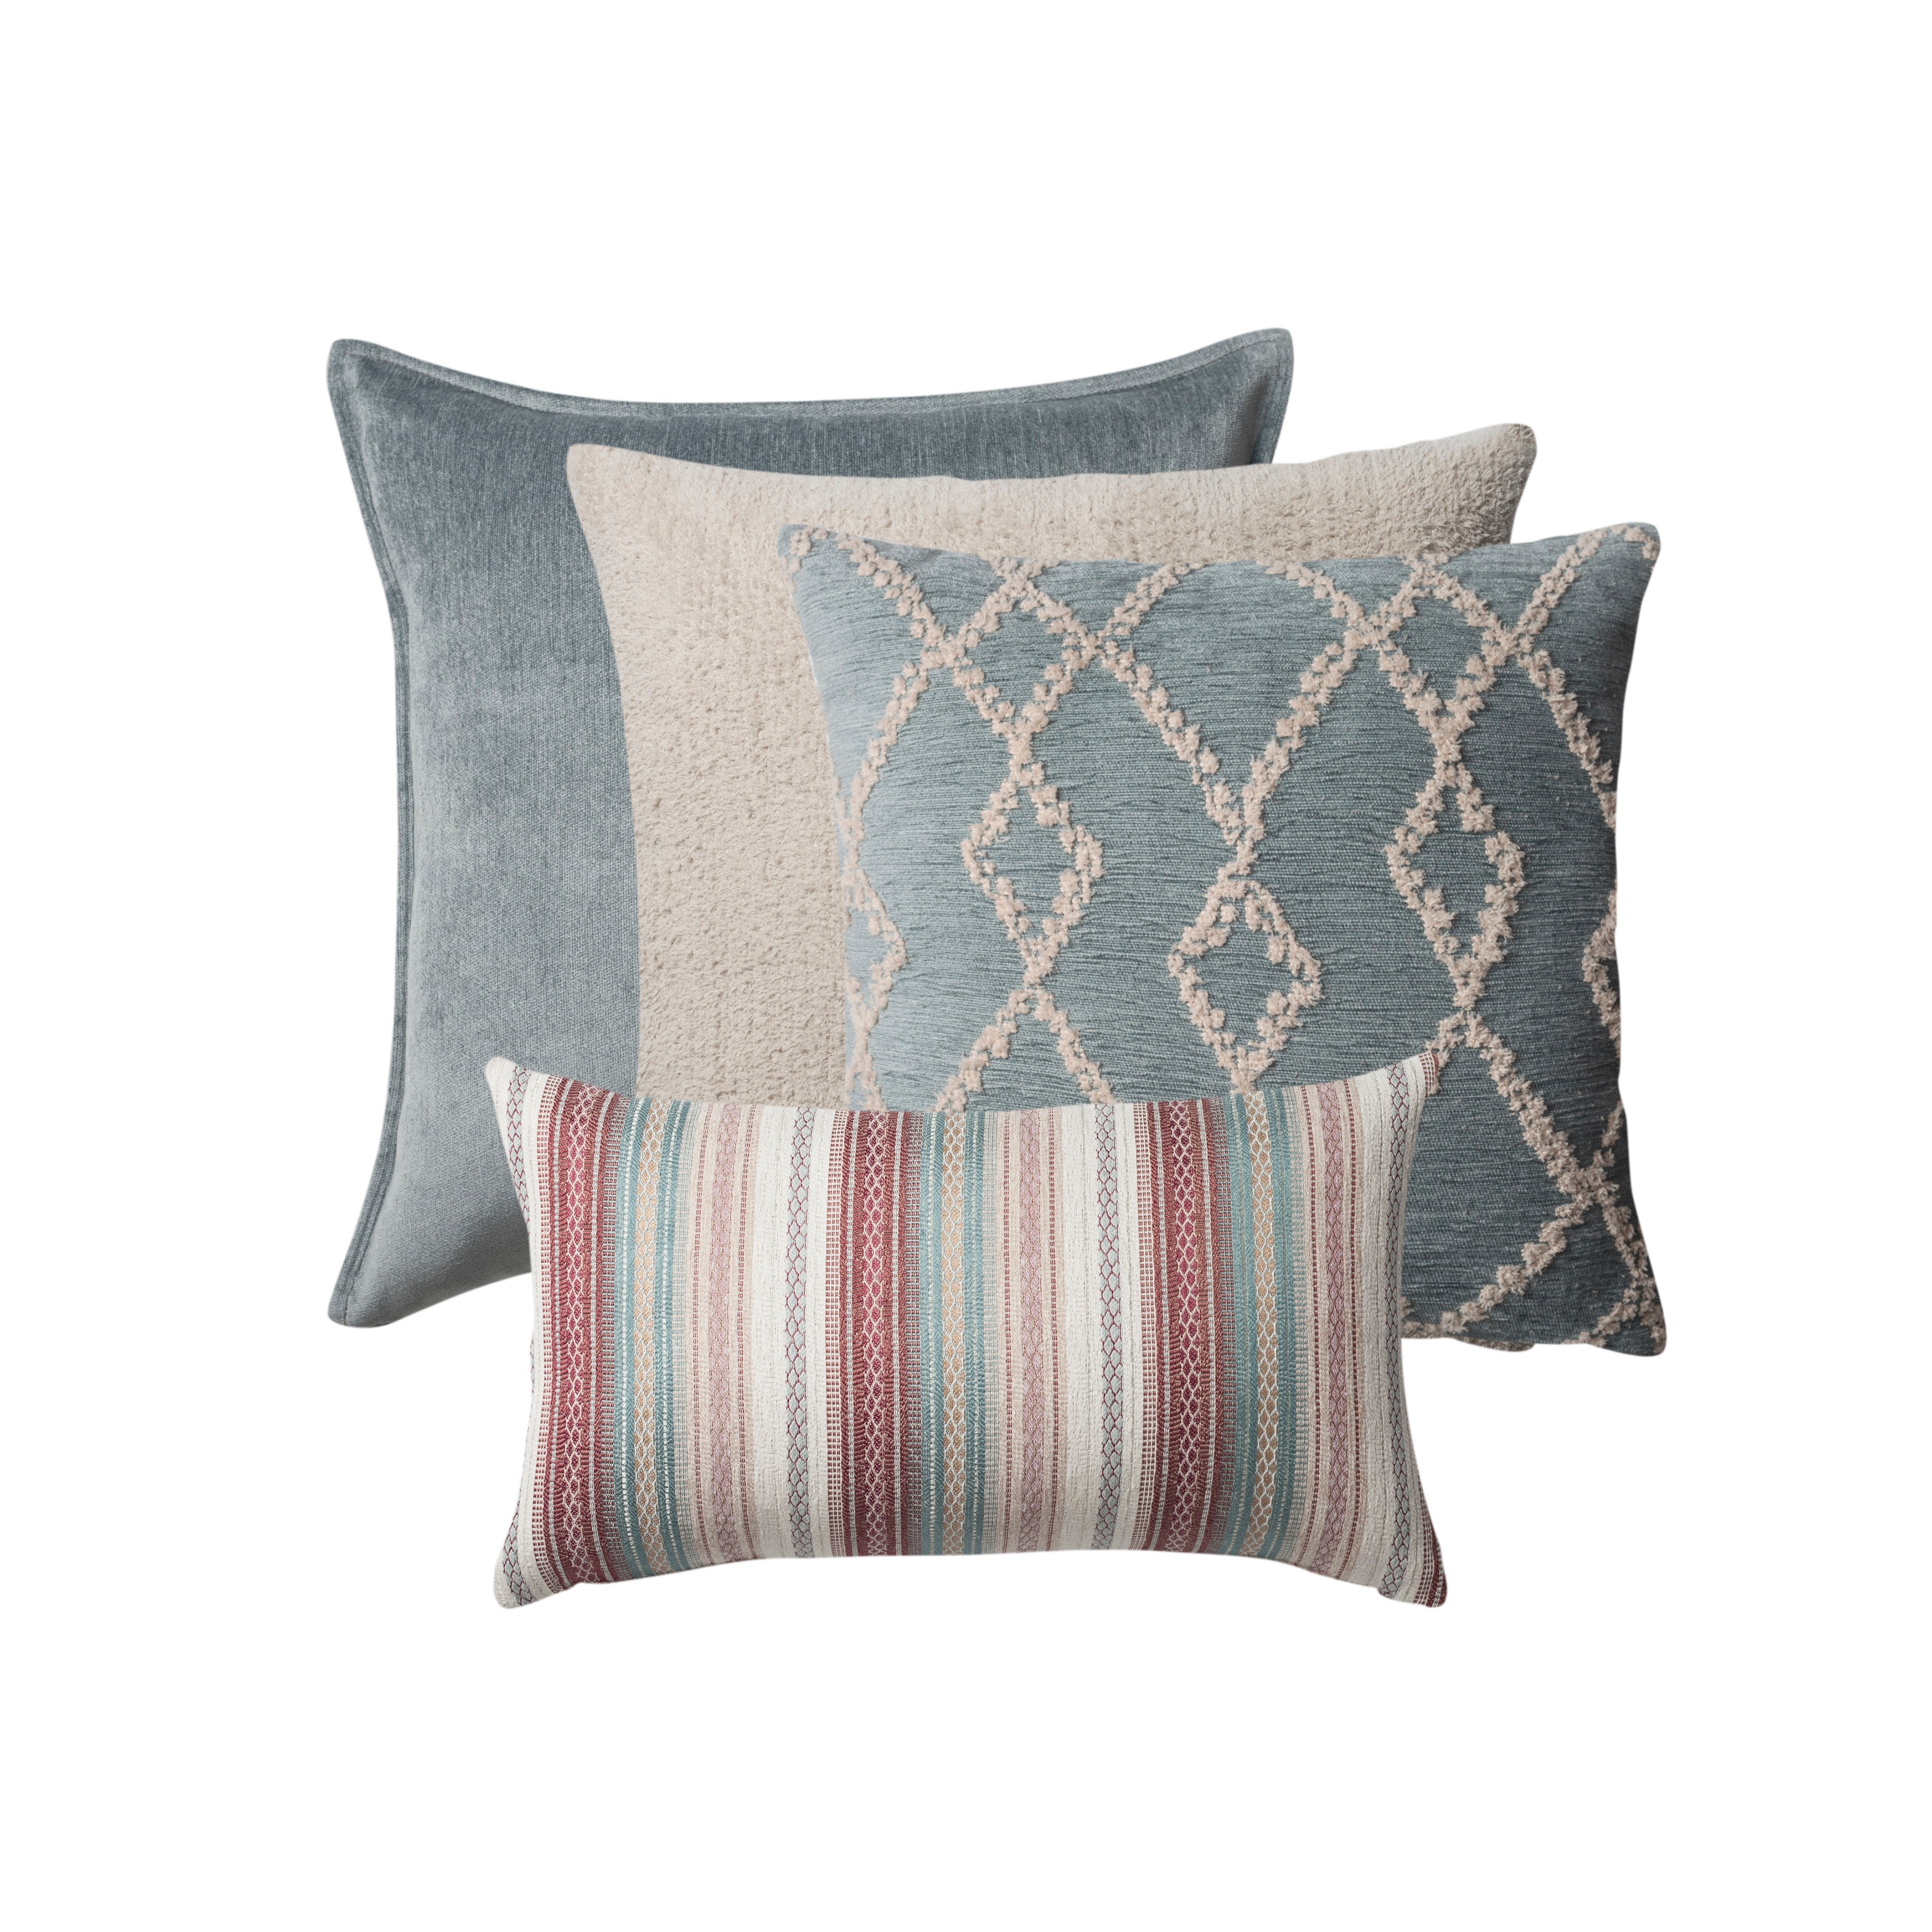 "Rodos" - Decorative Pillow - 4-Piece Combo Set (Cover Only)